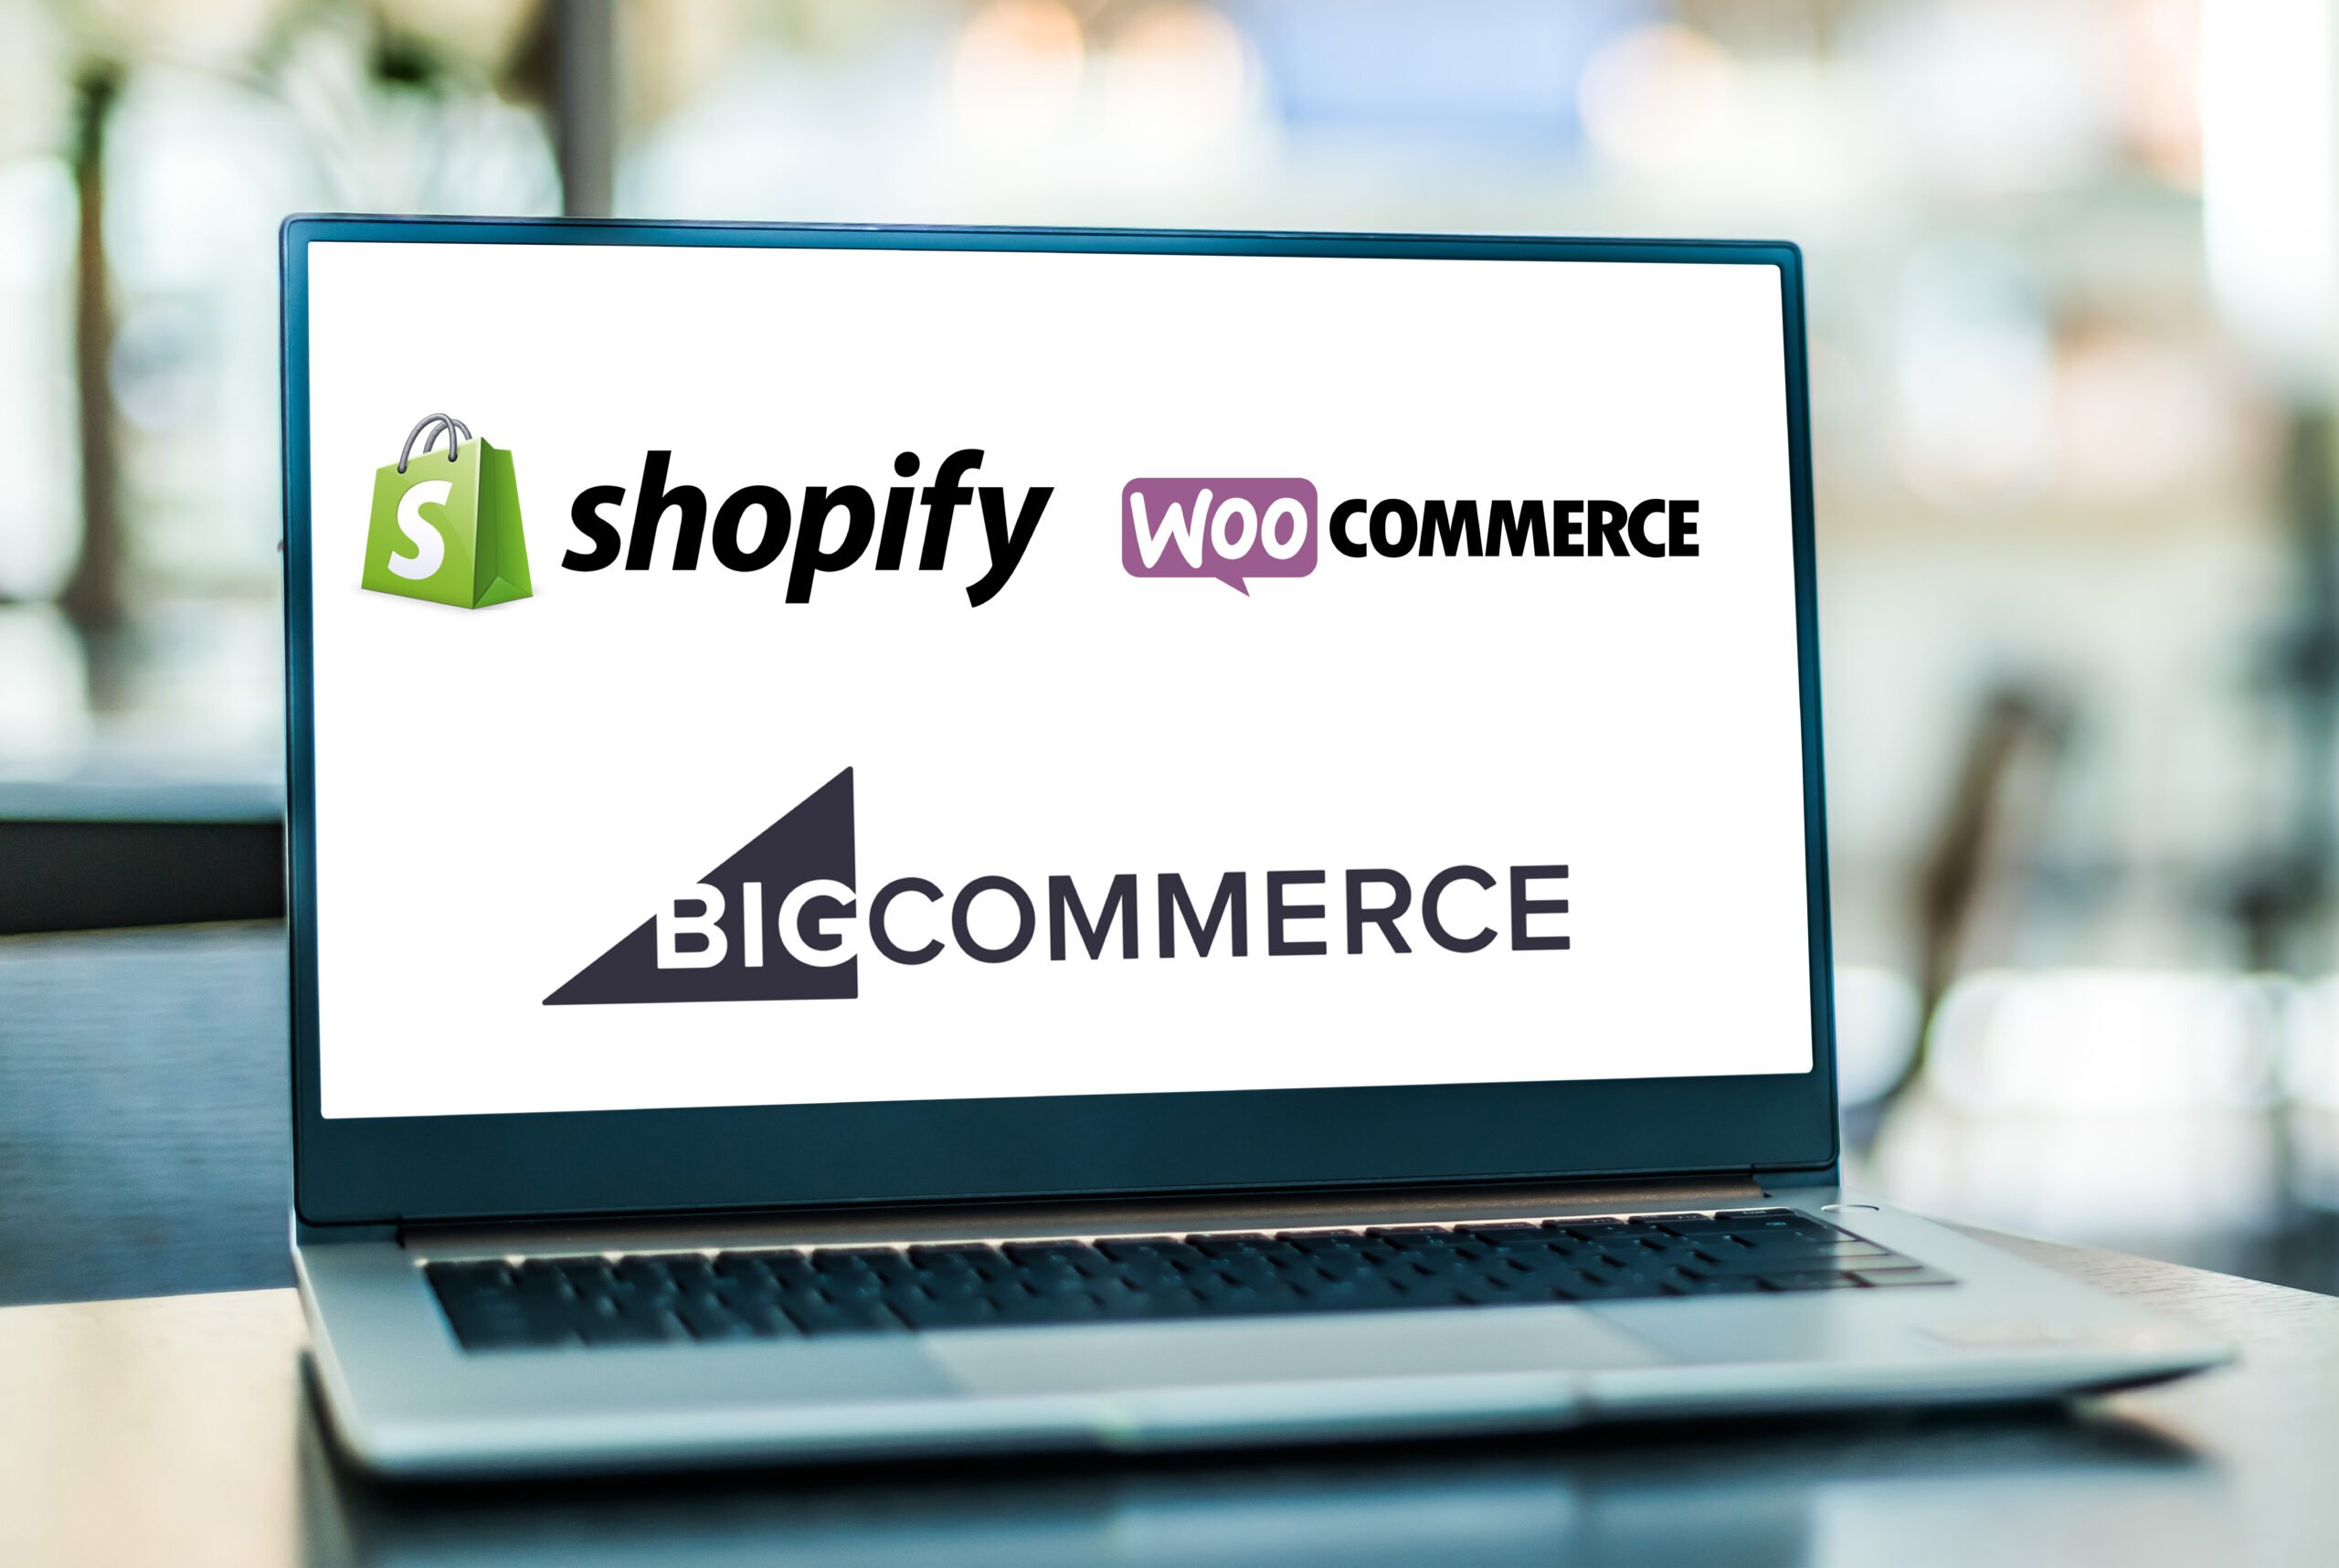 Shopify, Magento Commerce, WooCommerce, Bigcommerce and all major platforms